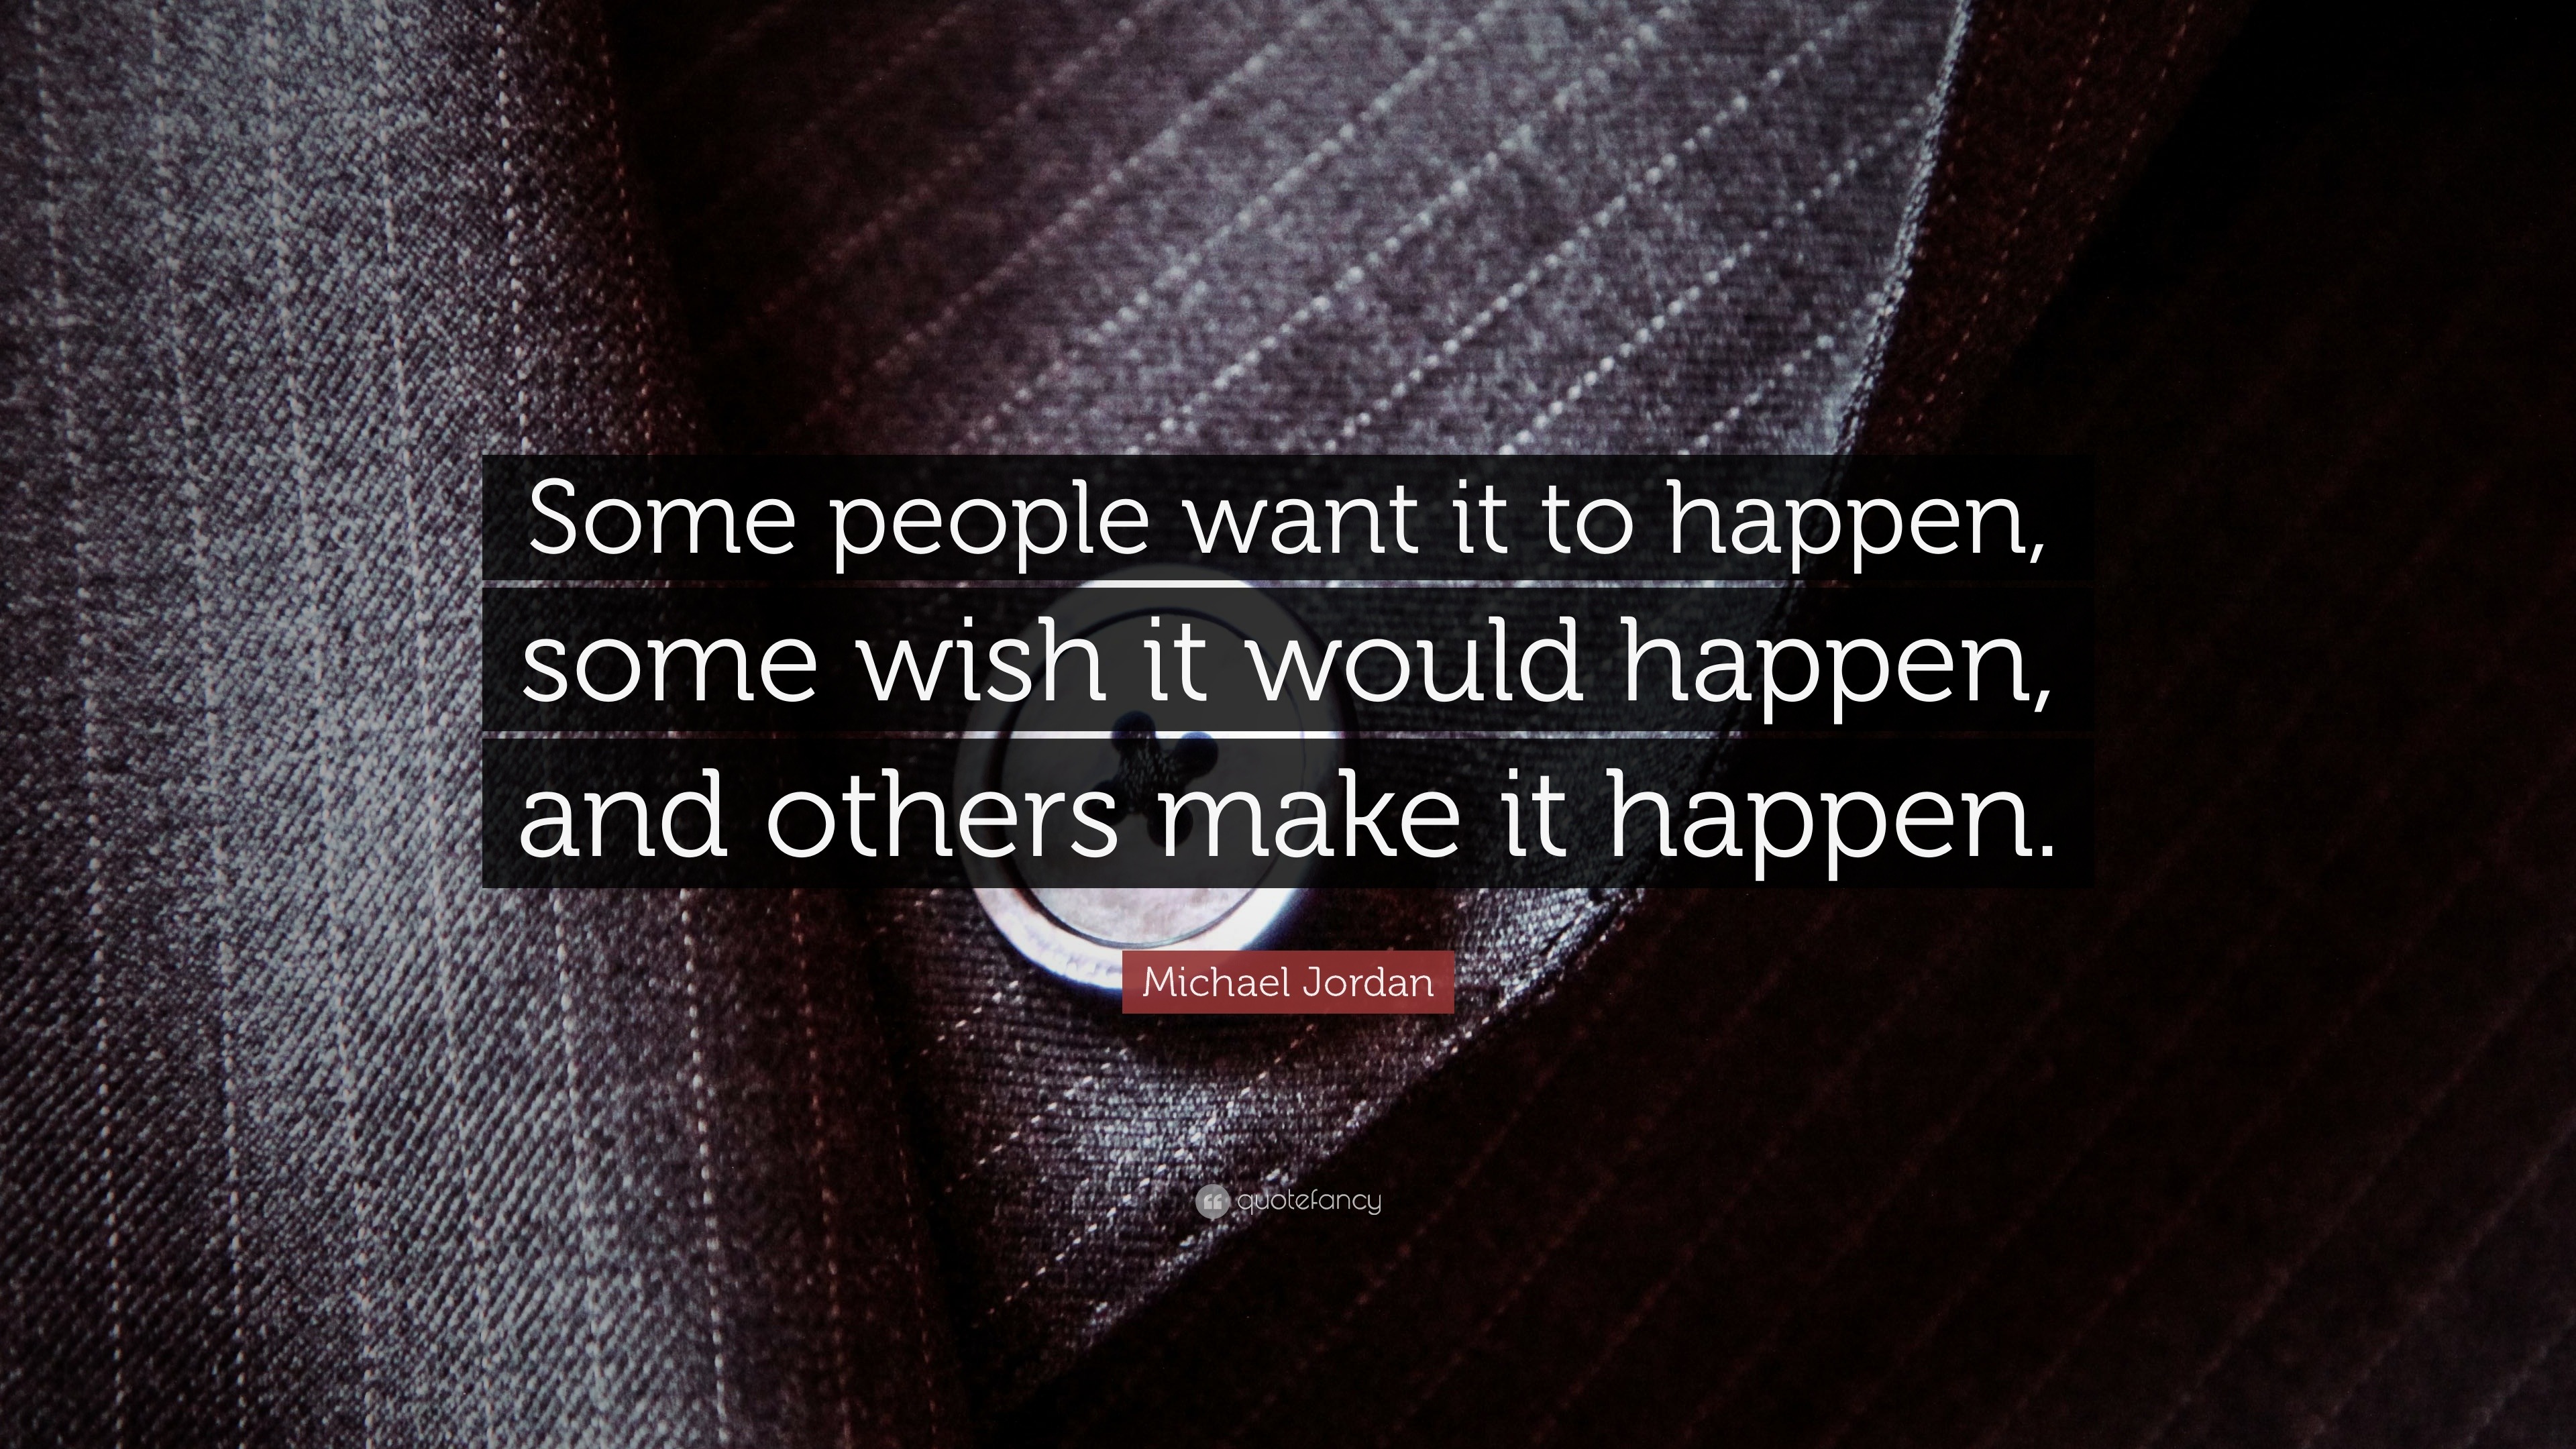 Michael Jordan Quote “some People Want It To Happen Some Wish It